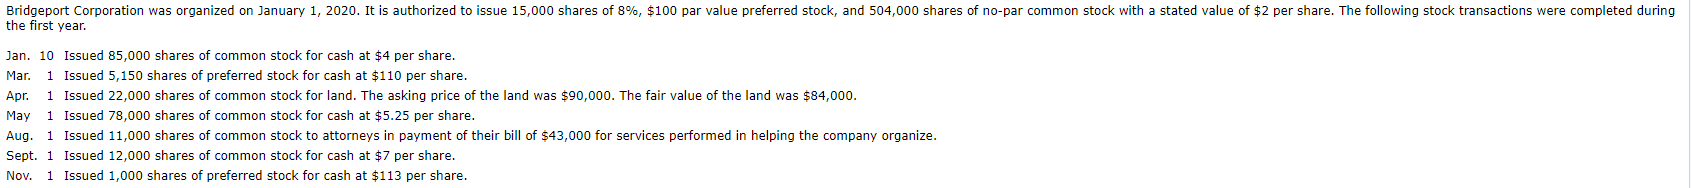 Bridgeport Corporation was organized on January 1, 2020. It is authorized to issue 15,000 shares of...-1